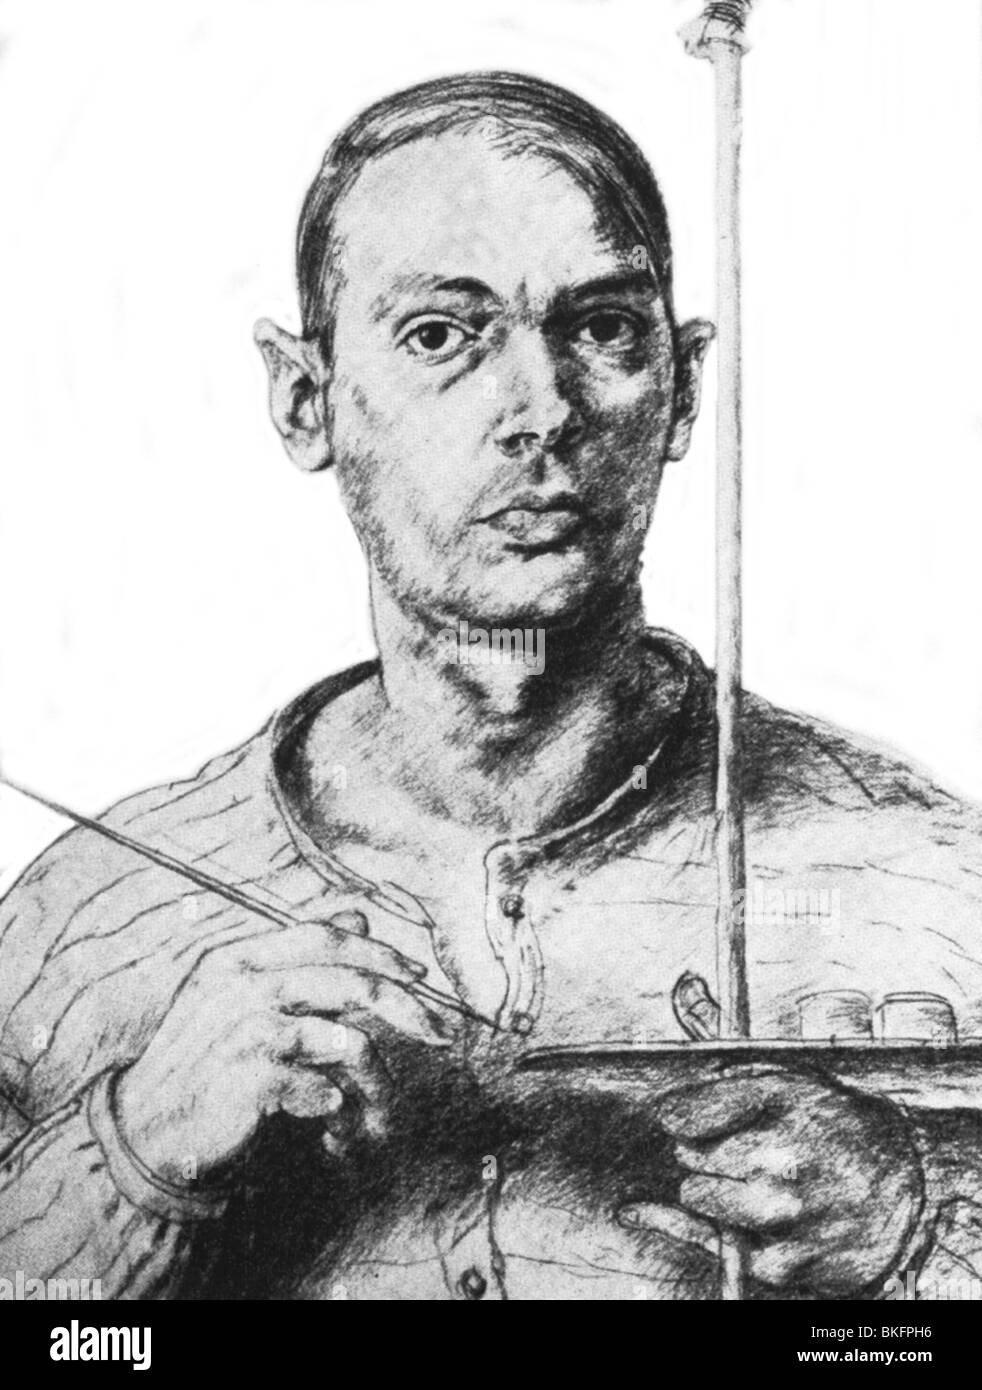 Tübke, Werner, 30.7.1929 - 27.5.2004, German artist (painter), portrait, pencil drawing, middle of 20th century, Stock Photo